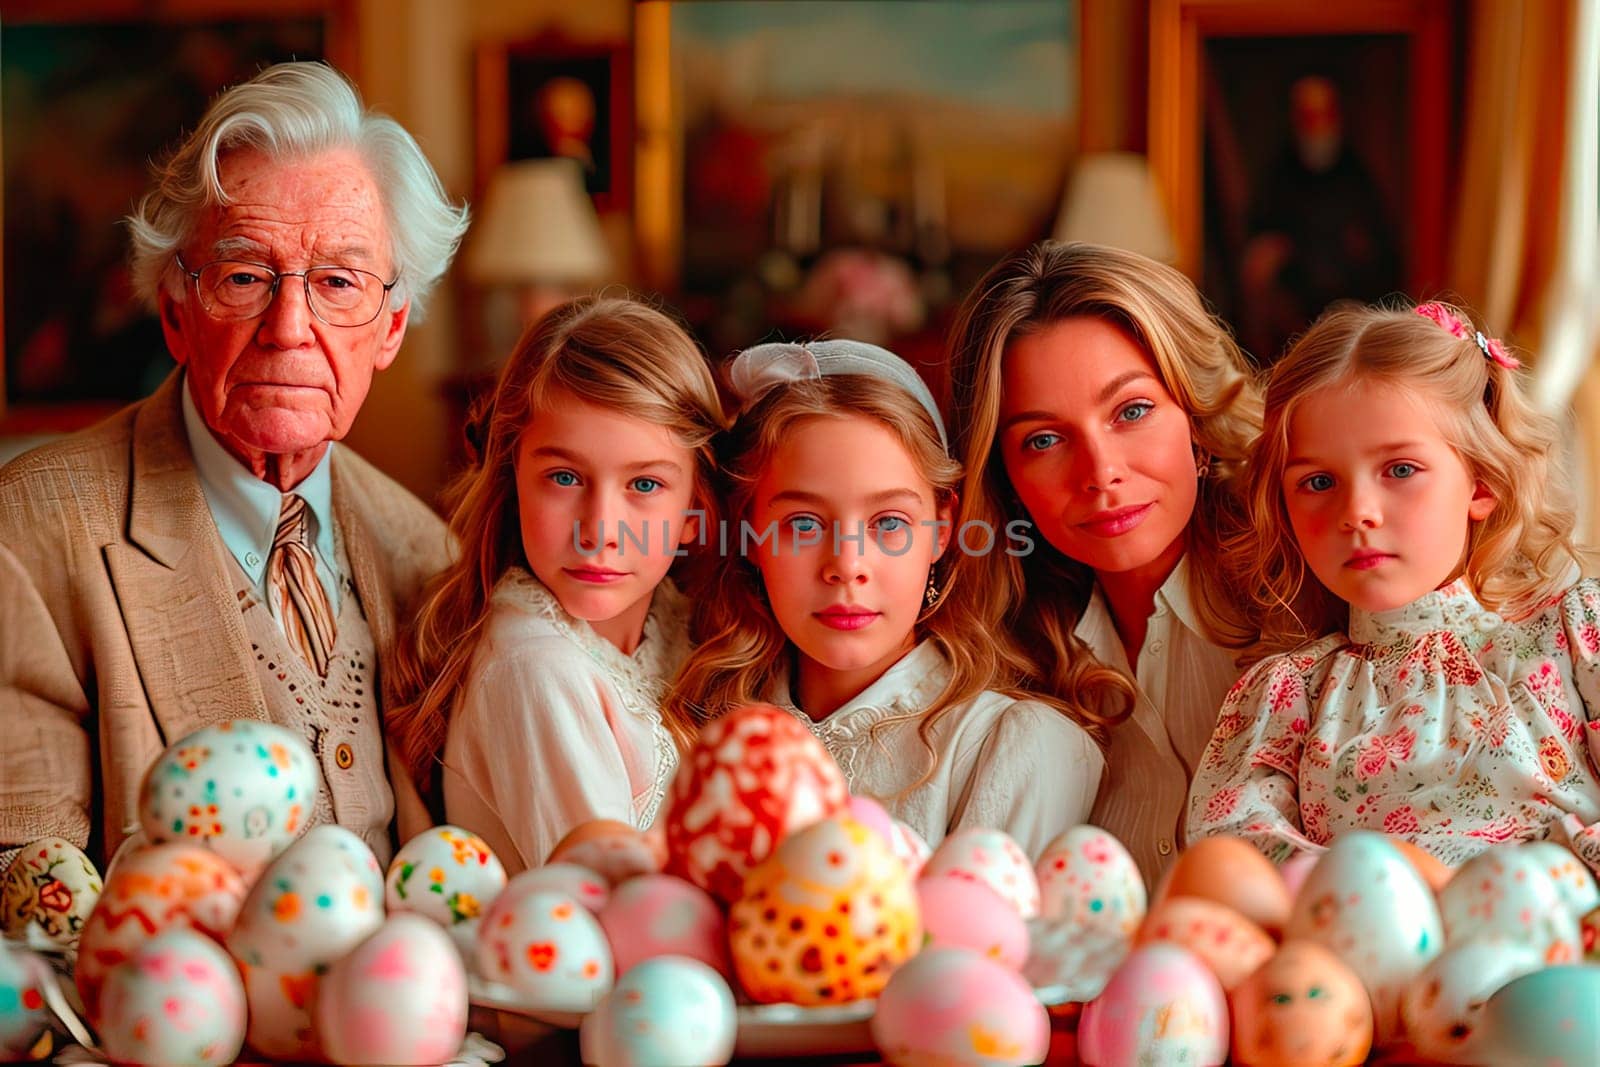 The family sits around the table. The table is set with lots of colourful Easter eggs. Sitting at the table are two girls, a woman and an older man. In the background you can see blurred paintings hanging on the walls.